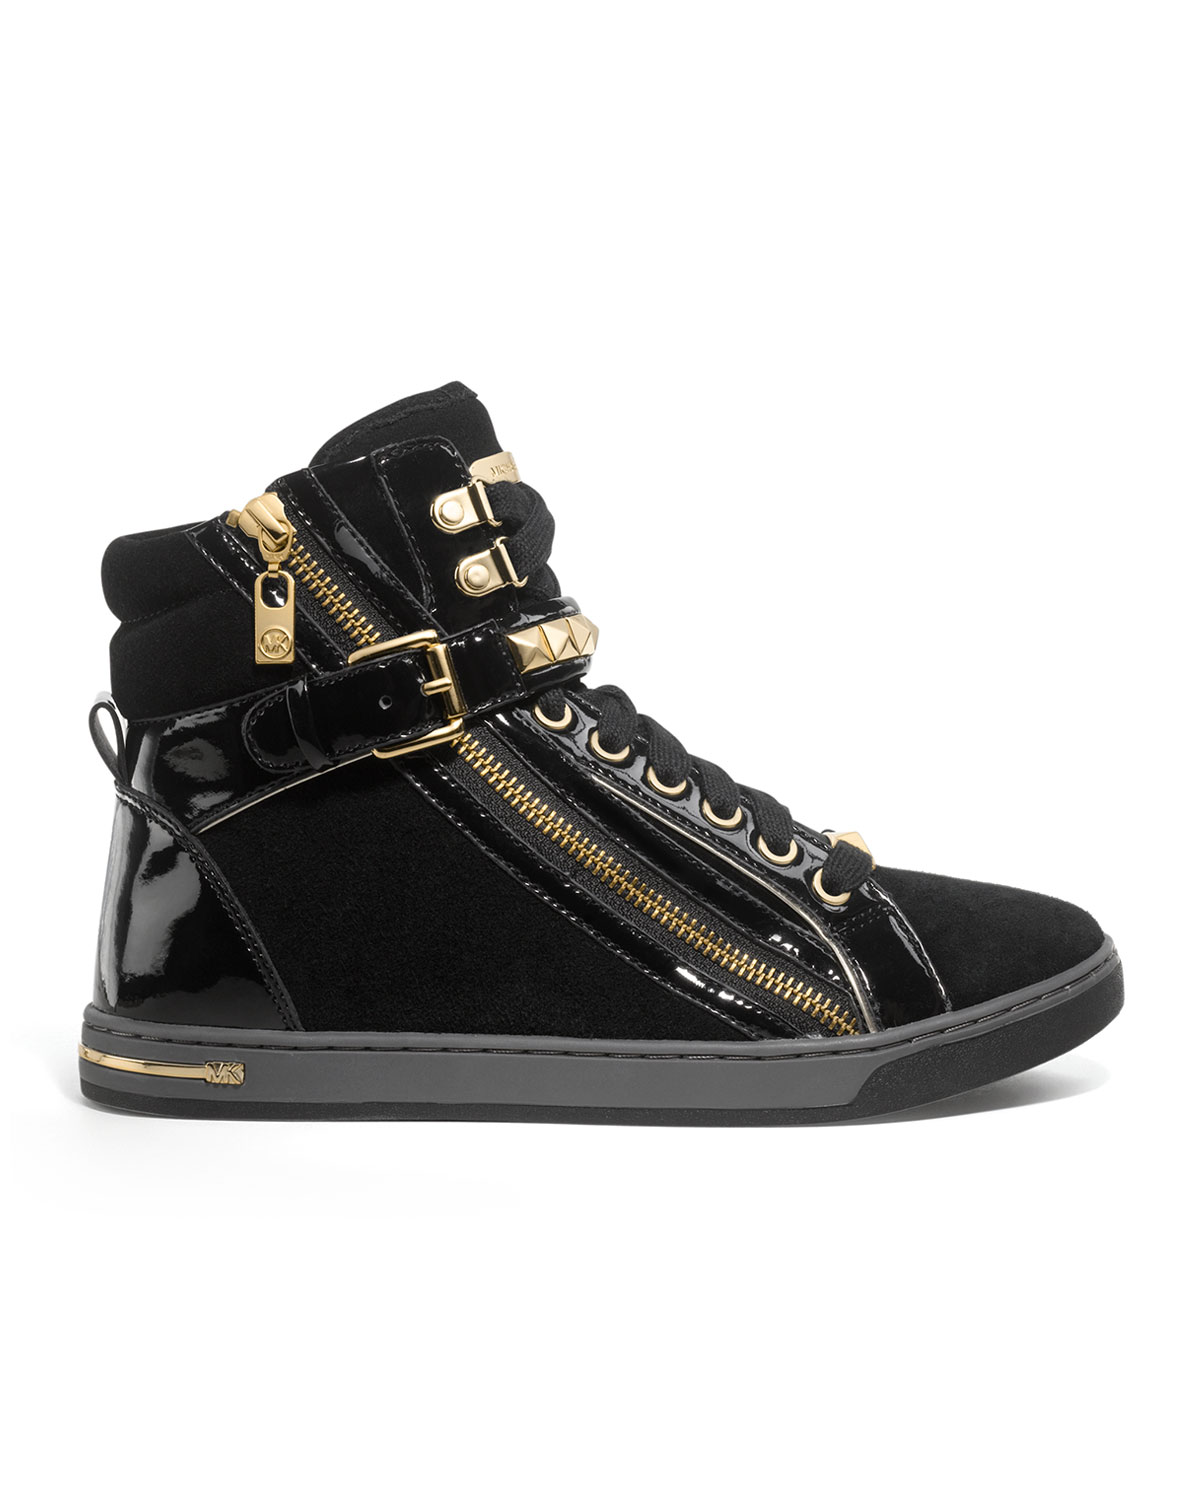 Michael Kors Glam Studded High Top in Black | Lyst